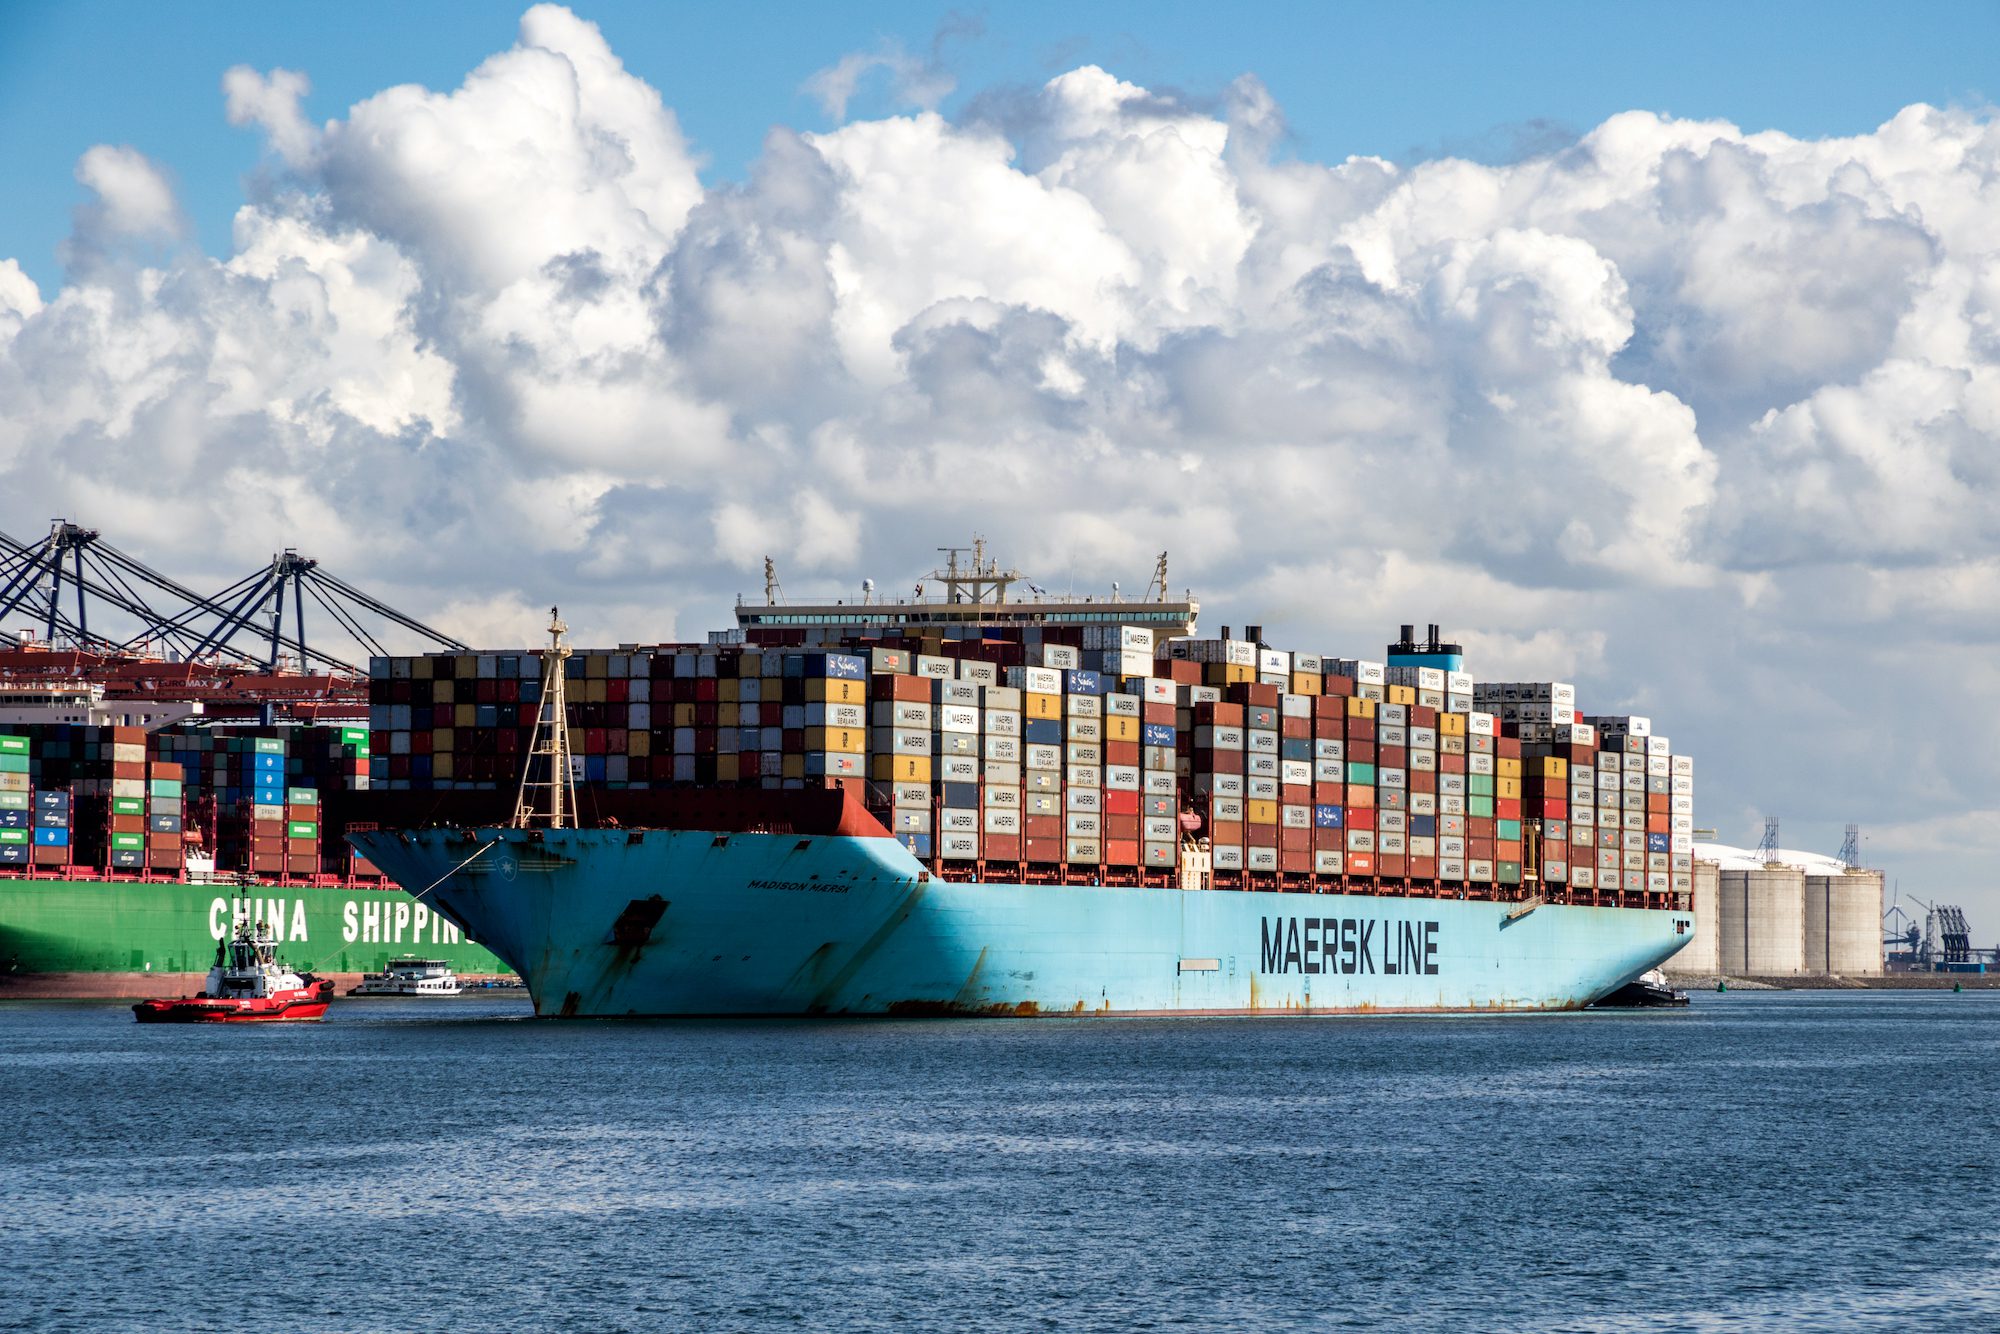 Managed Decline: Ocean Carriers Face  Challenge of Keeping Pandemic Windfalls, Drewry Says